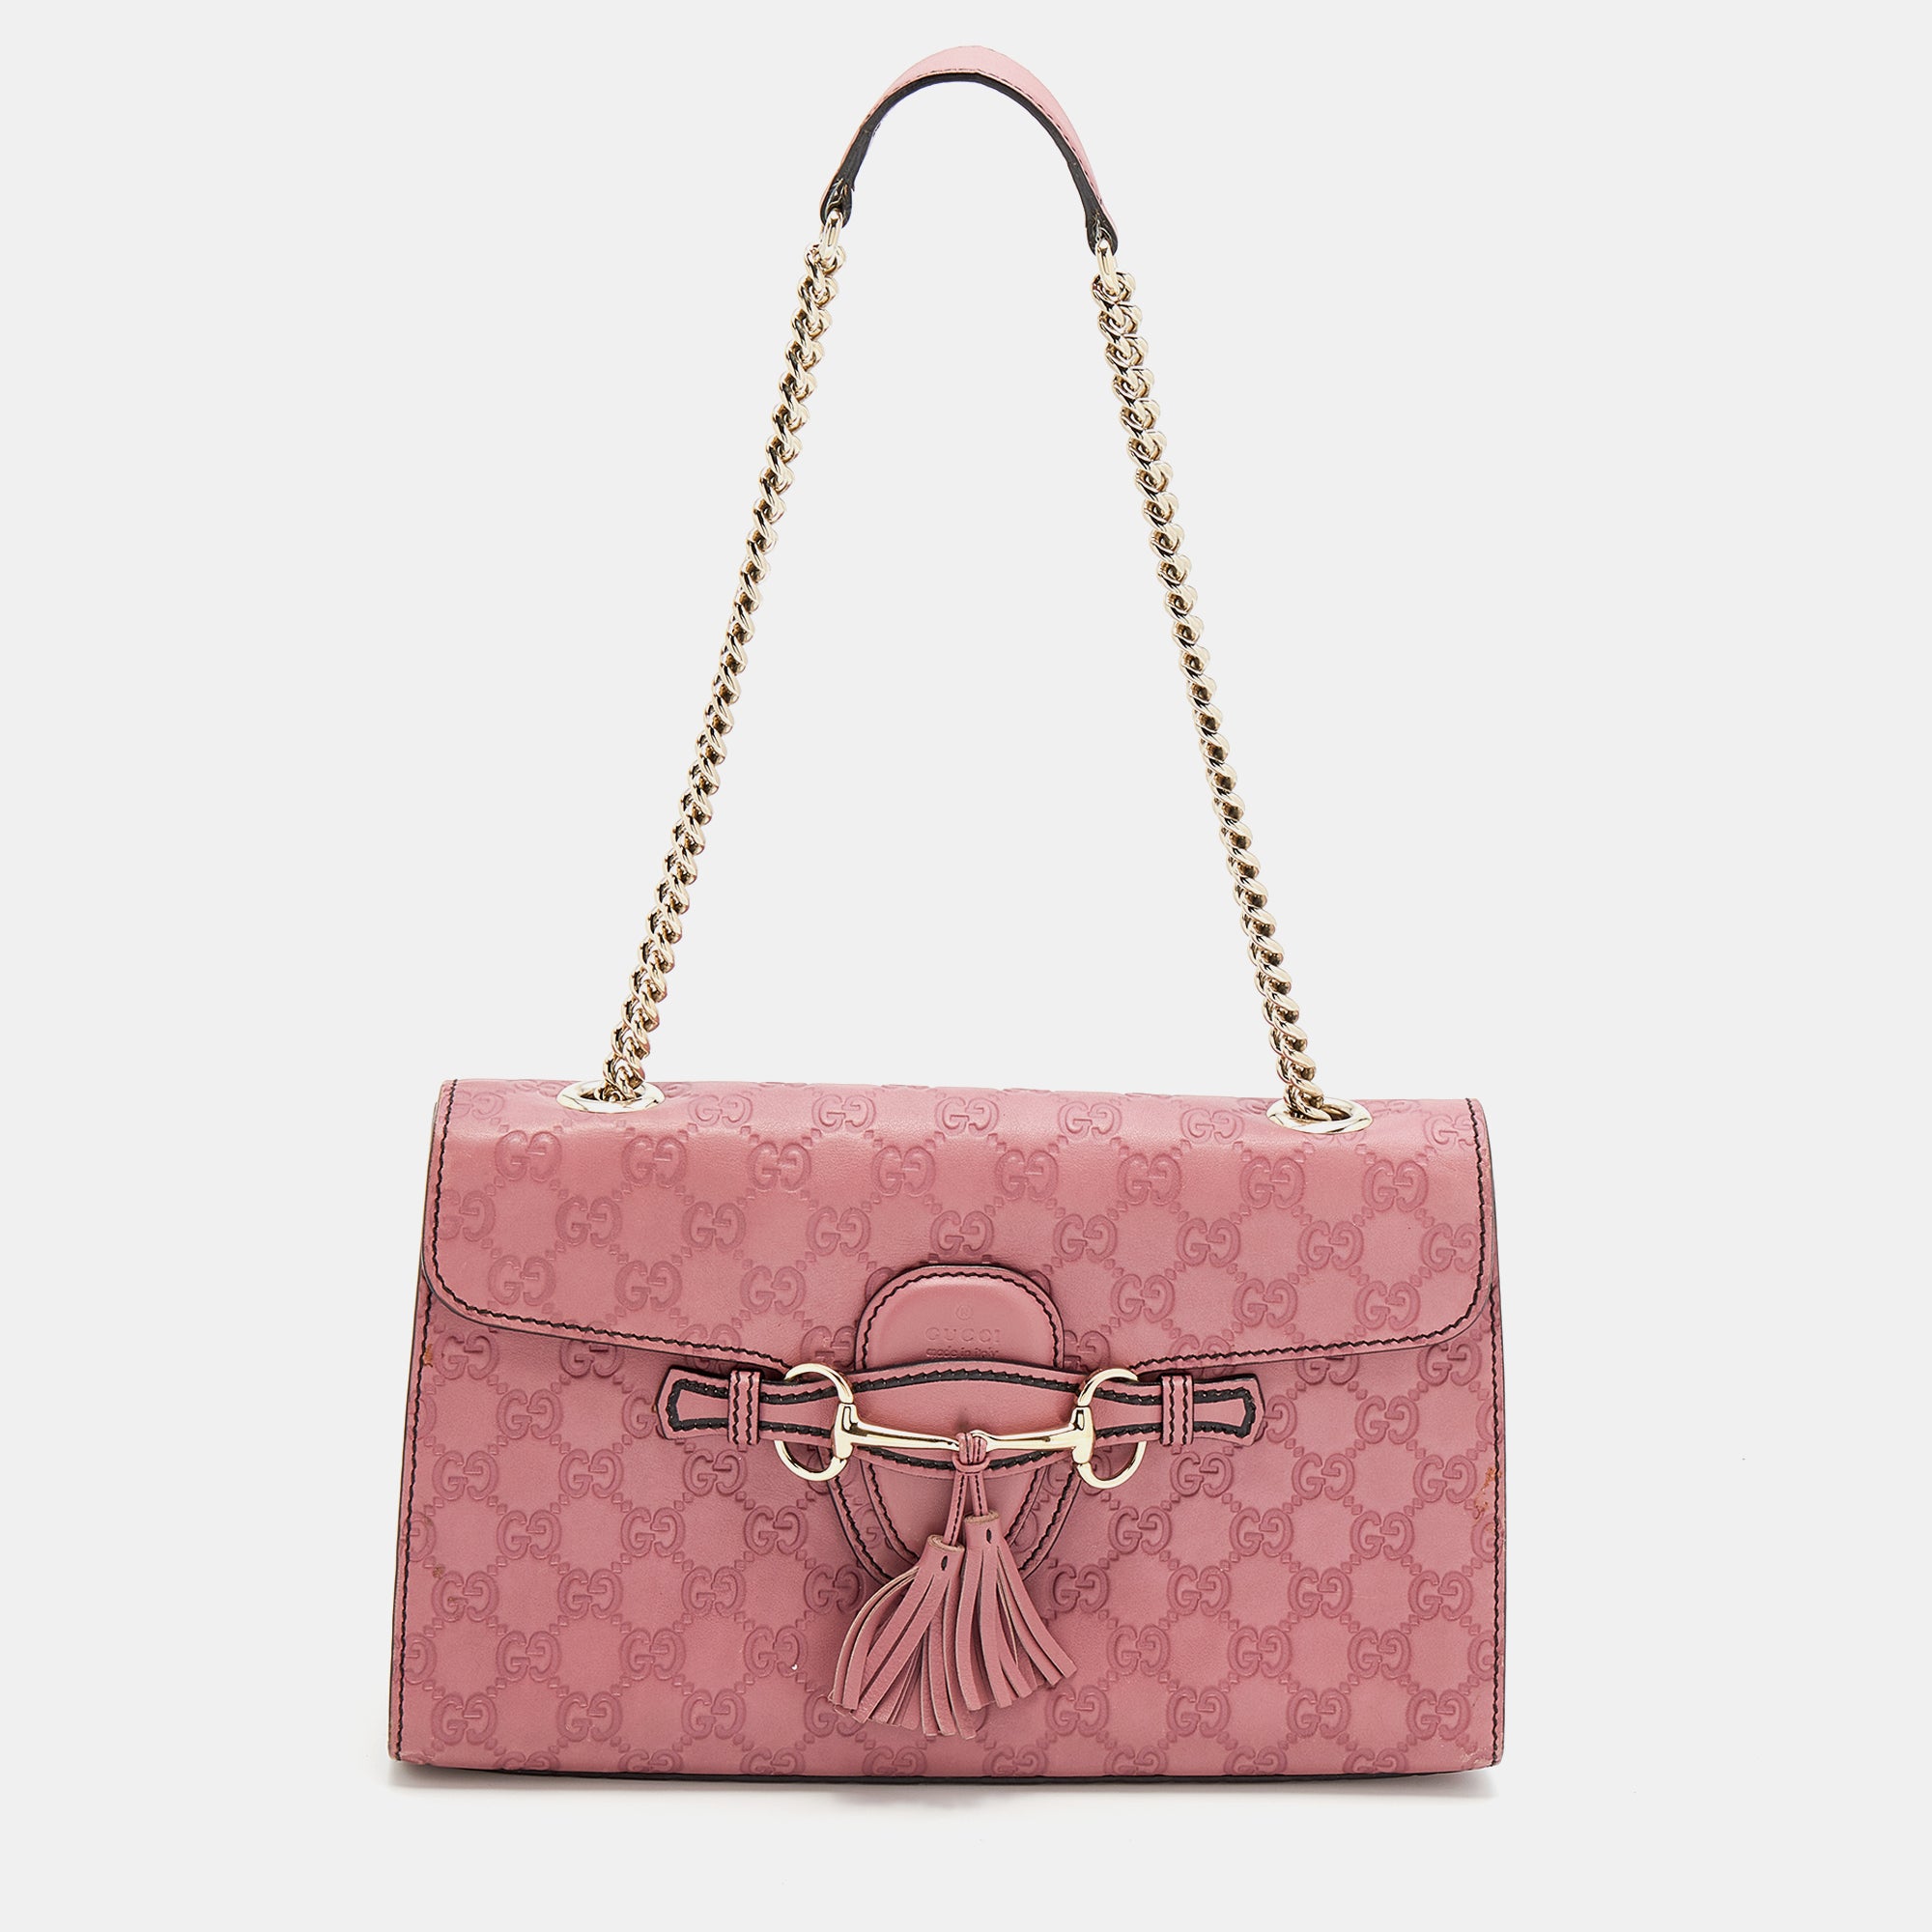 Gucci Pink Guccissima Leather Emily Chain Shoulder Bag